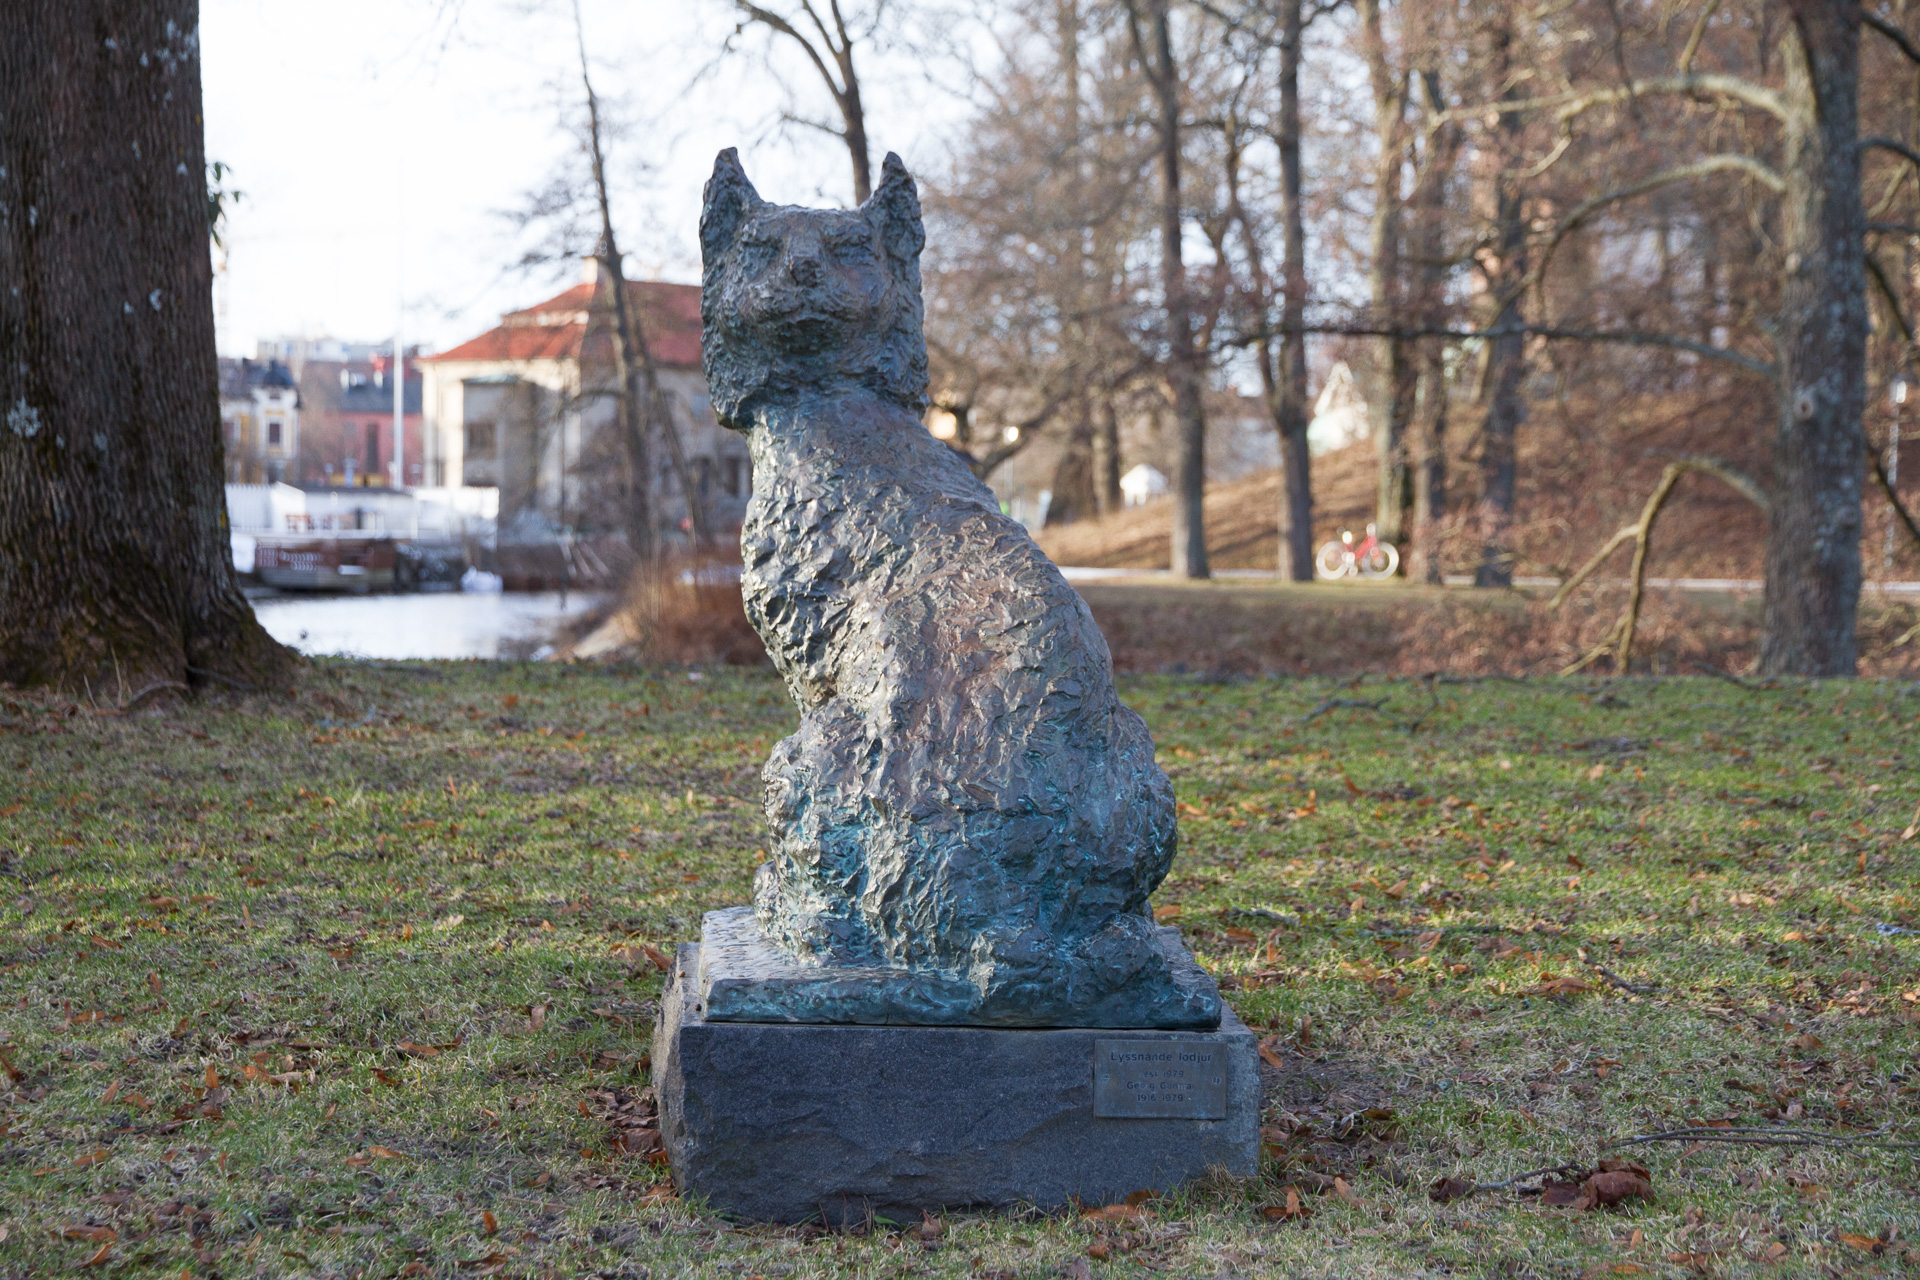 A lynx sitting on a rock. The statue is in bluish bronze.